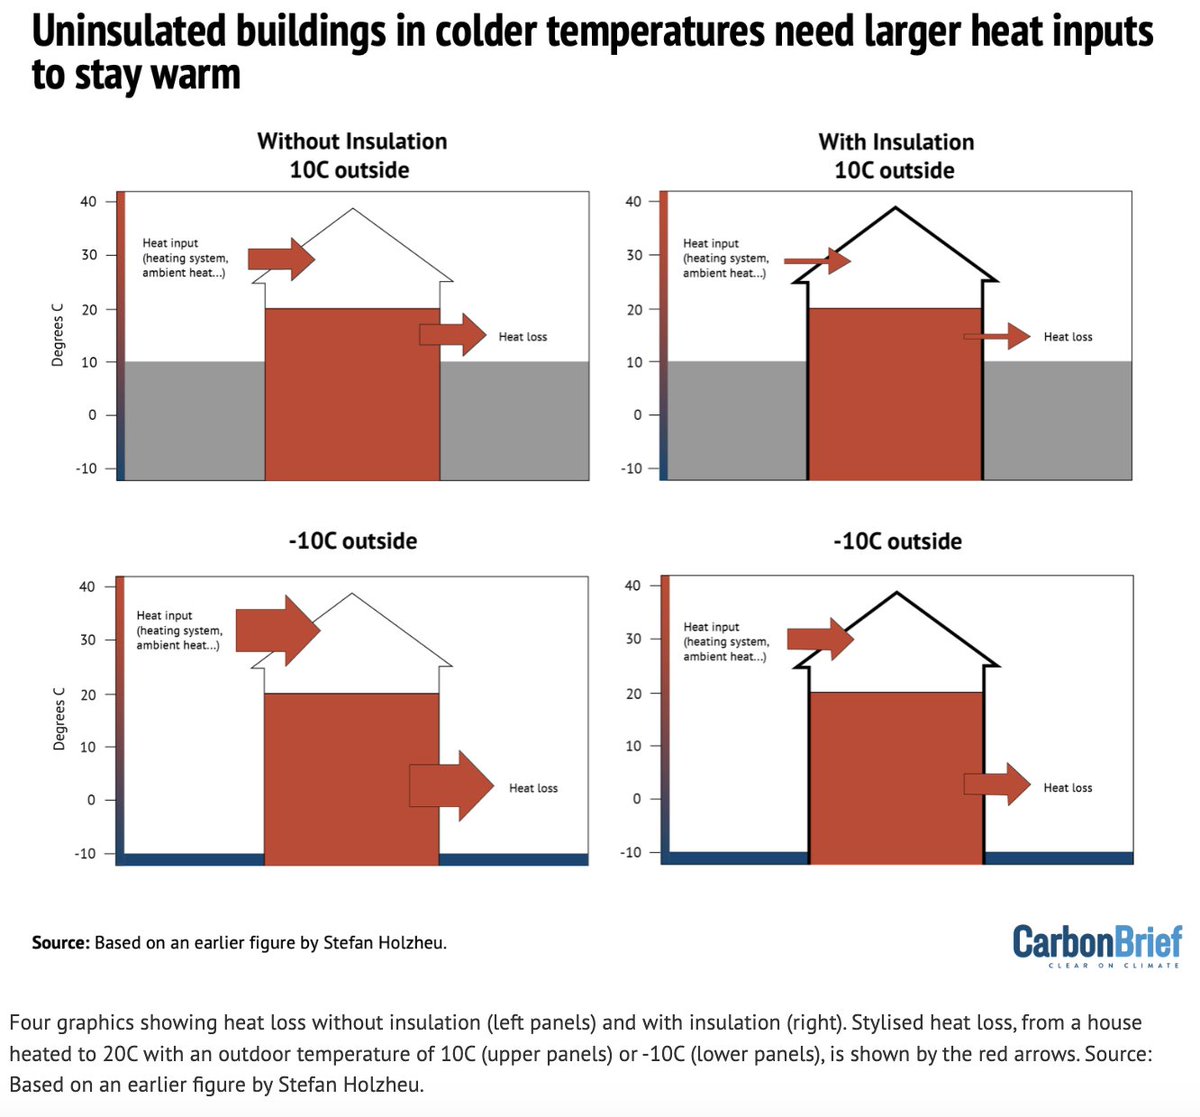 'Will we be warm?' I was asked last night by a friend thinking of installing a heat pump in an old not well insulated Victorian house. My response: 'Yes you will.' Heat pumps can work in any building if sized, designed and installed correctly. 🧵 carbonbrief.org/factcheck-18-m…